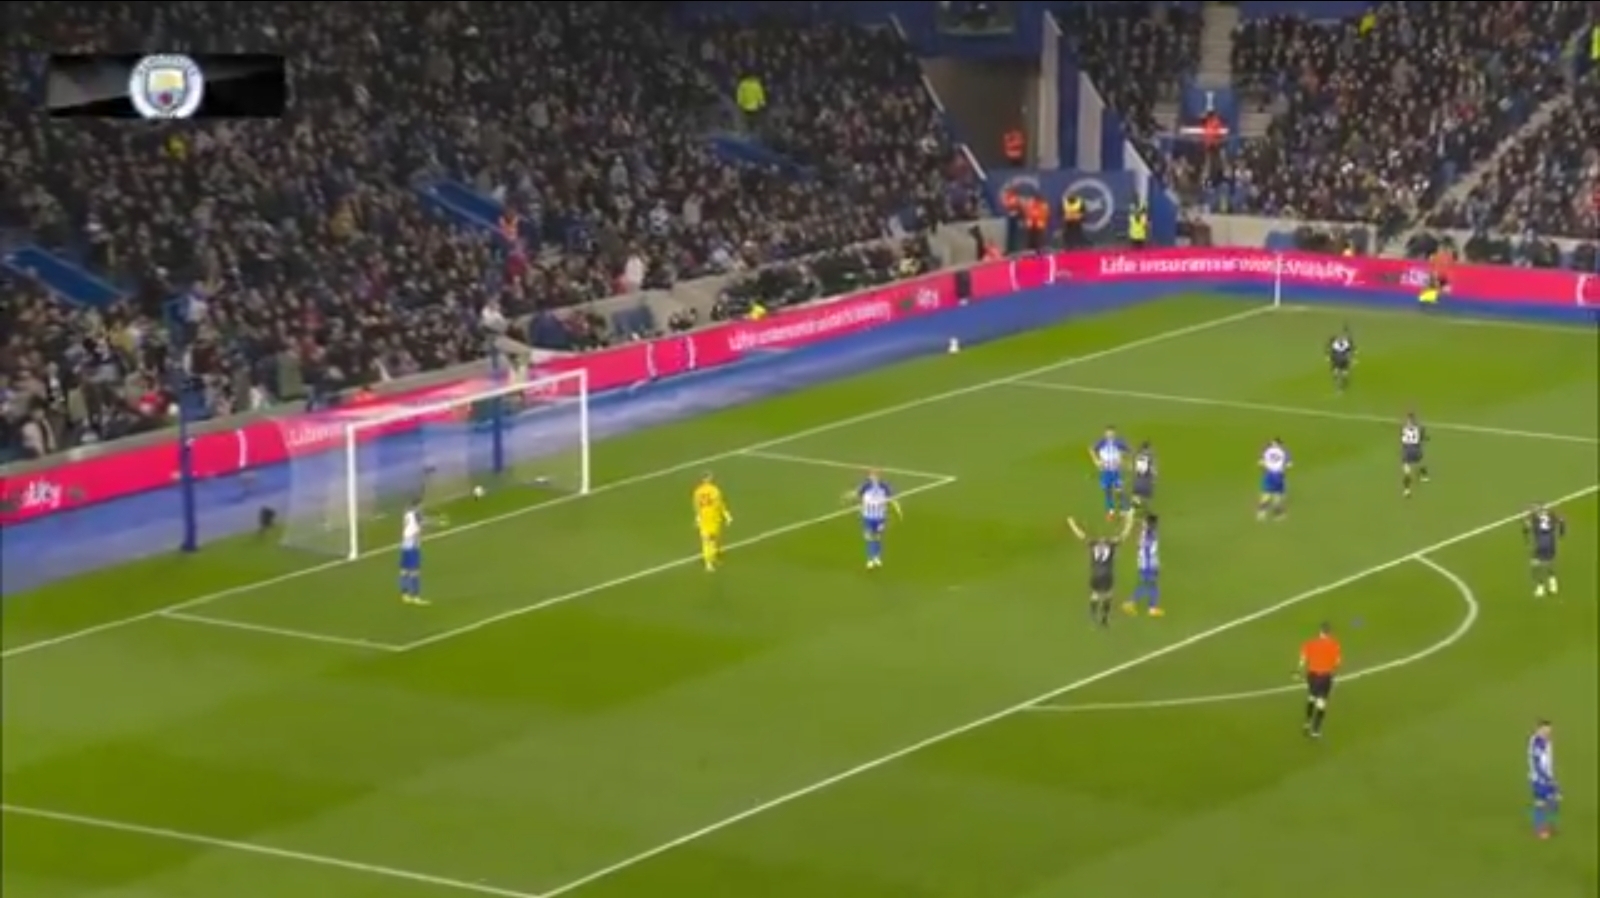 Watch: Manchester City punish Brighton for awful playing out from the back and make it 3-0